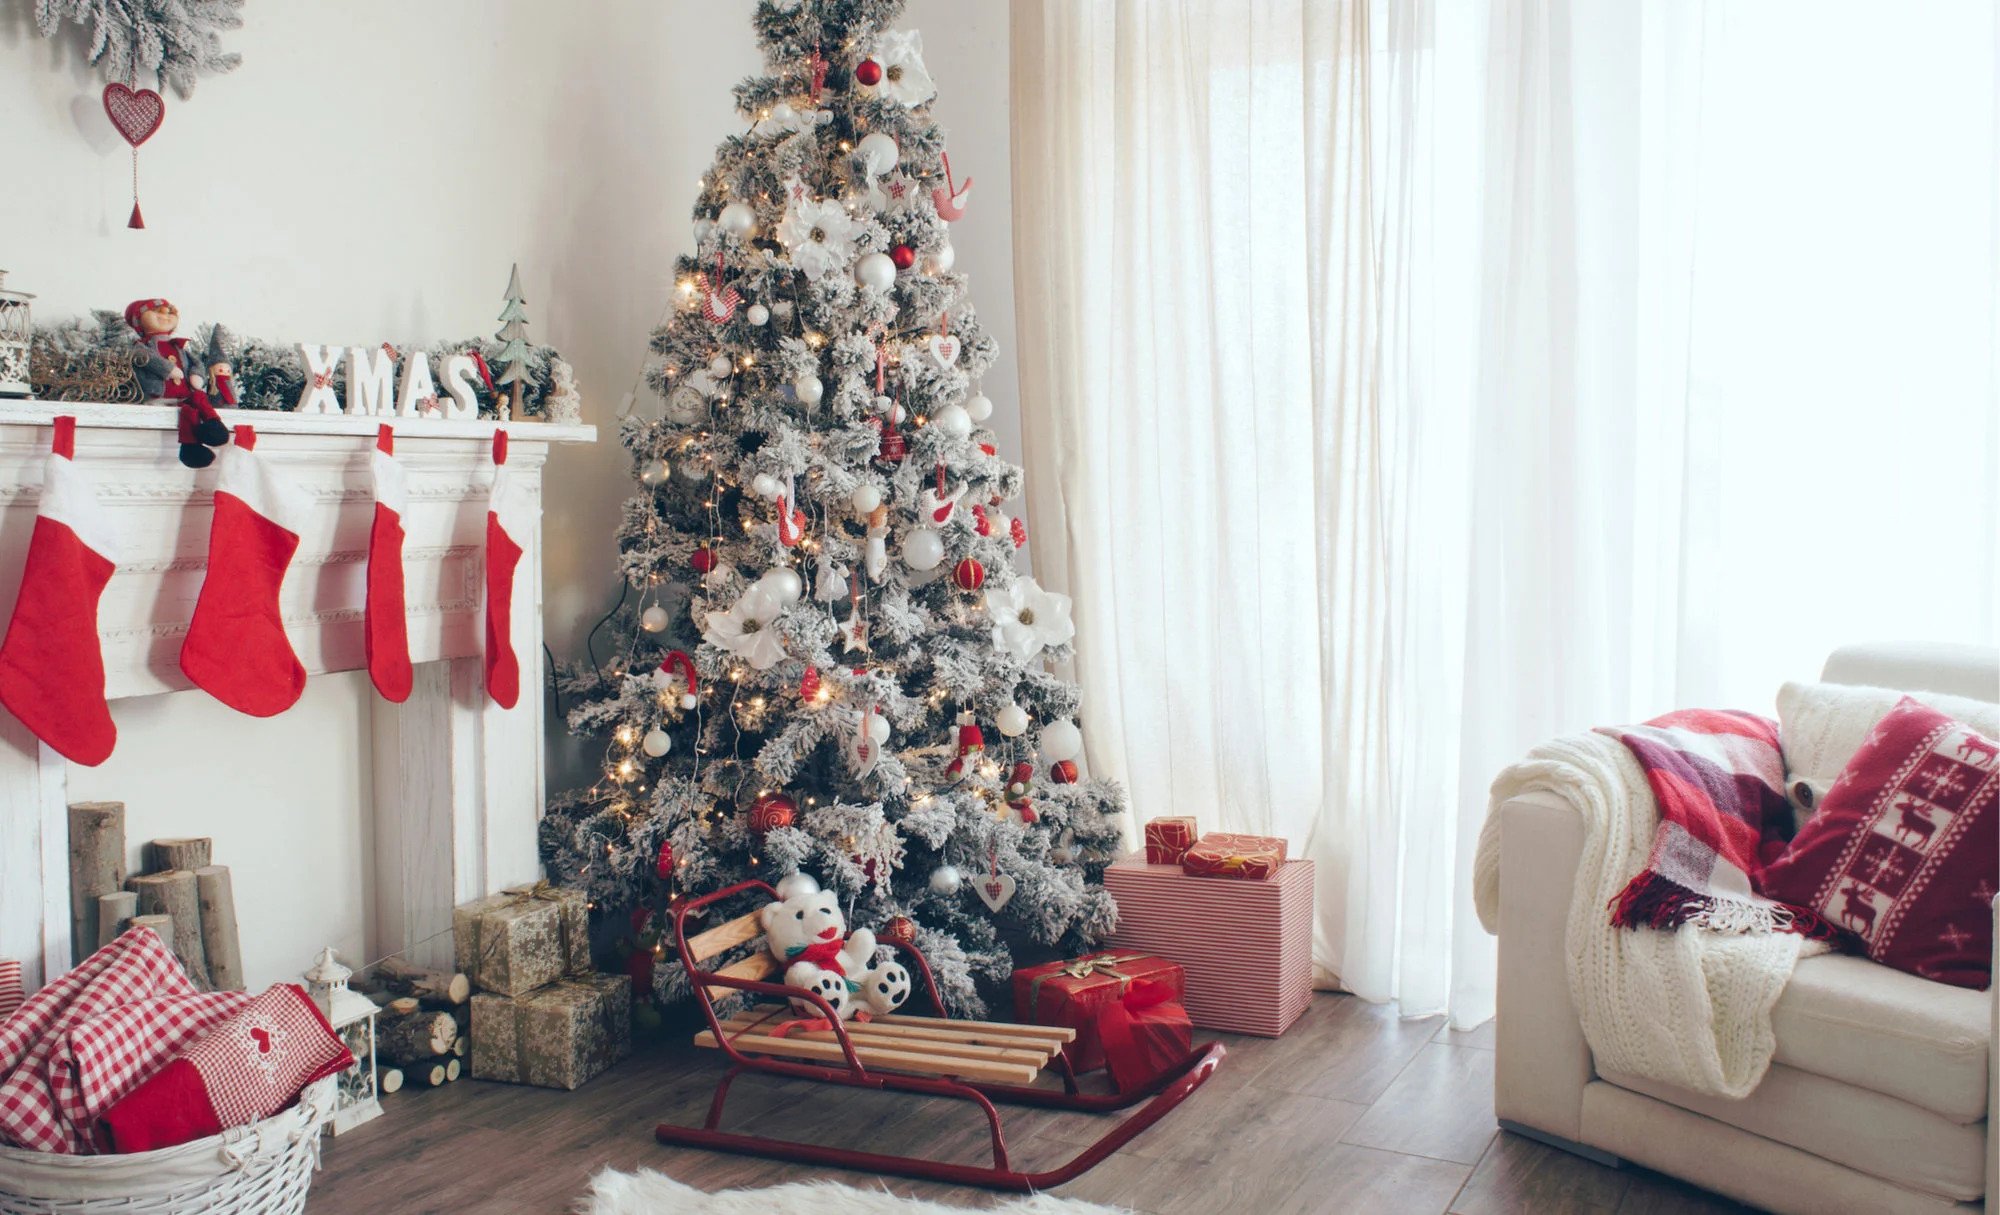 Need Some Last-Minute Holiday Decorating Ideas?